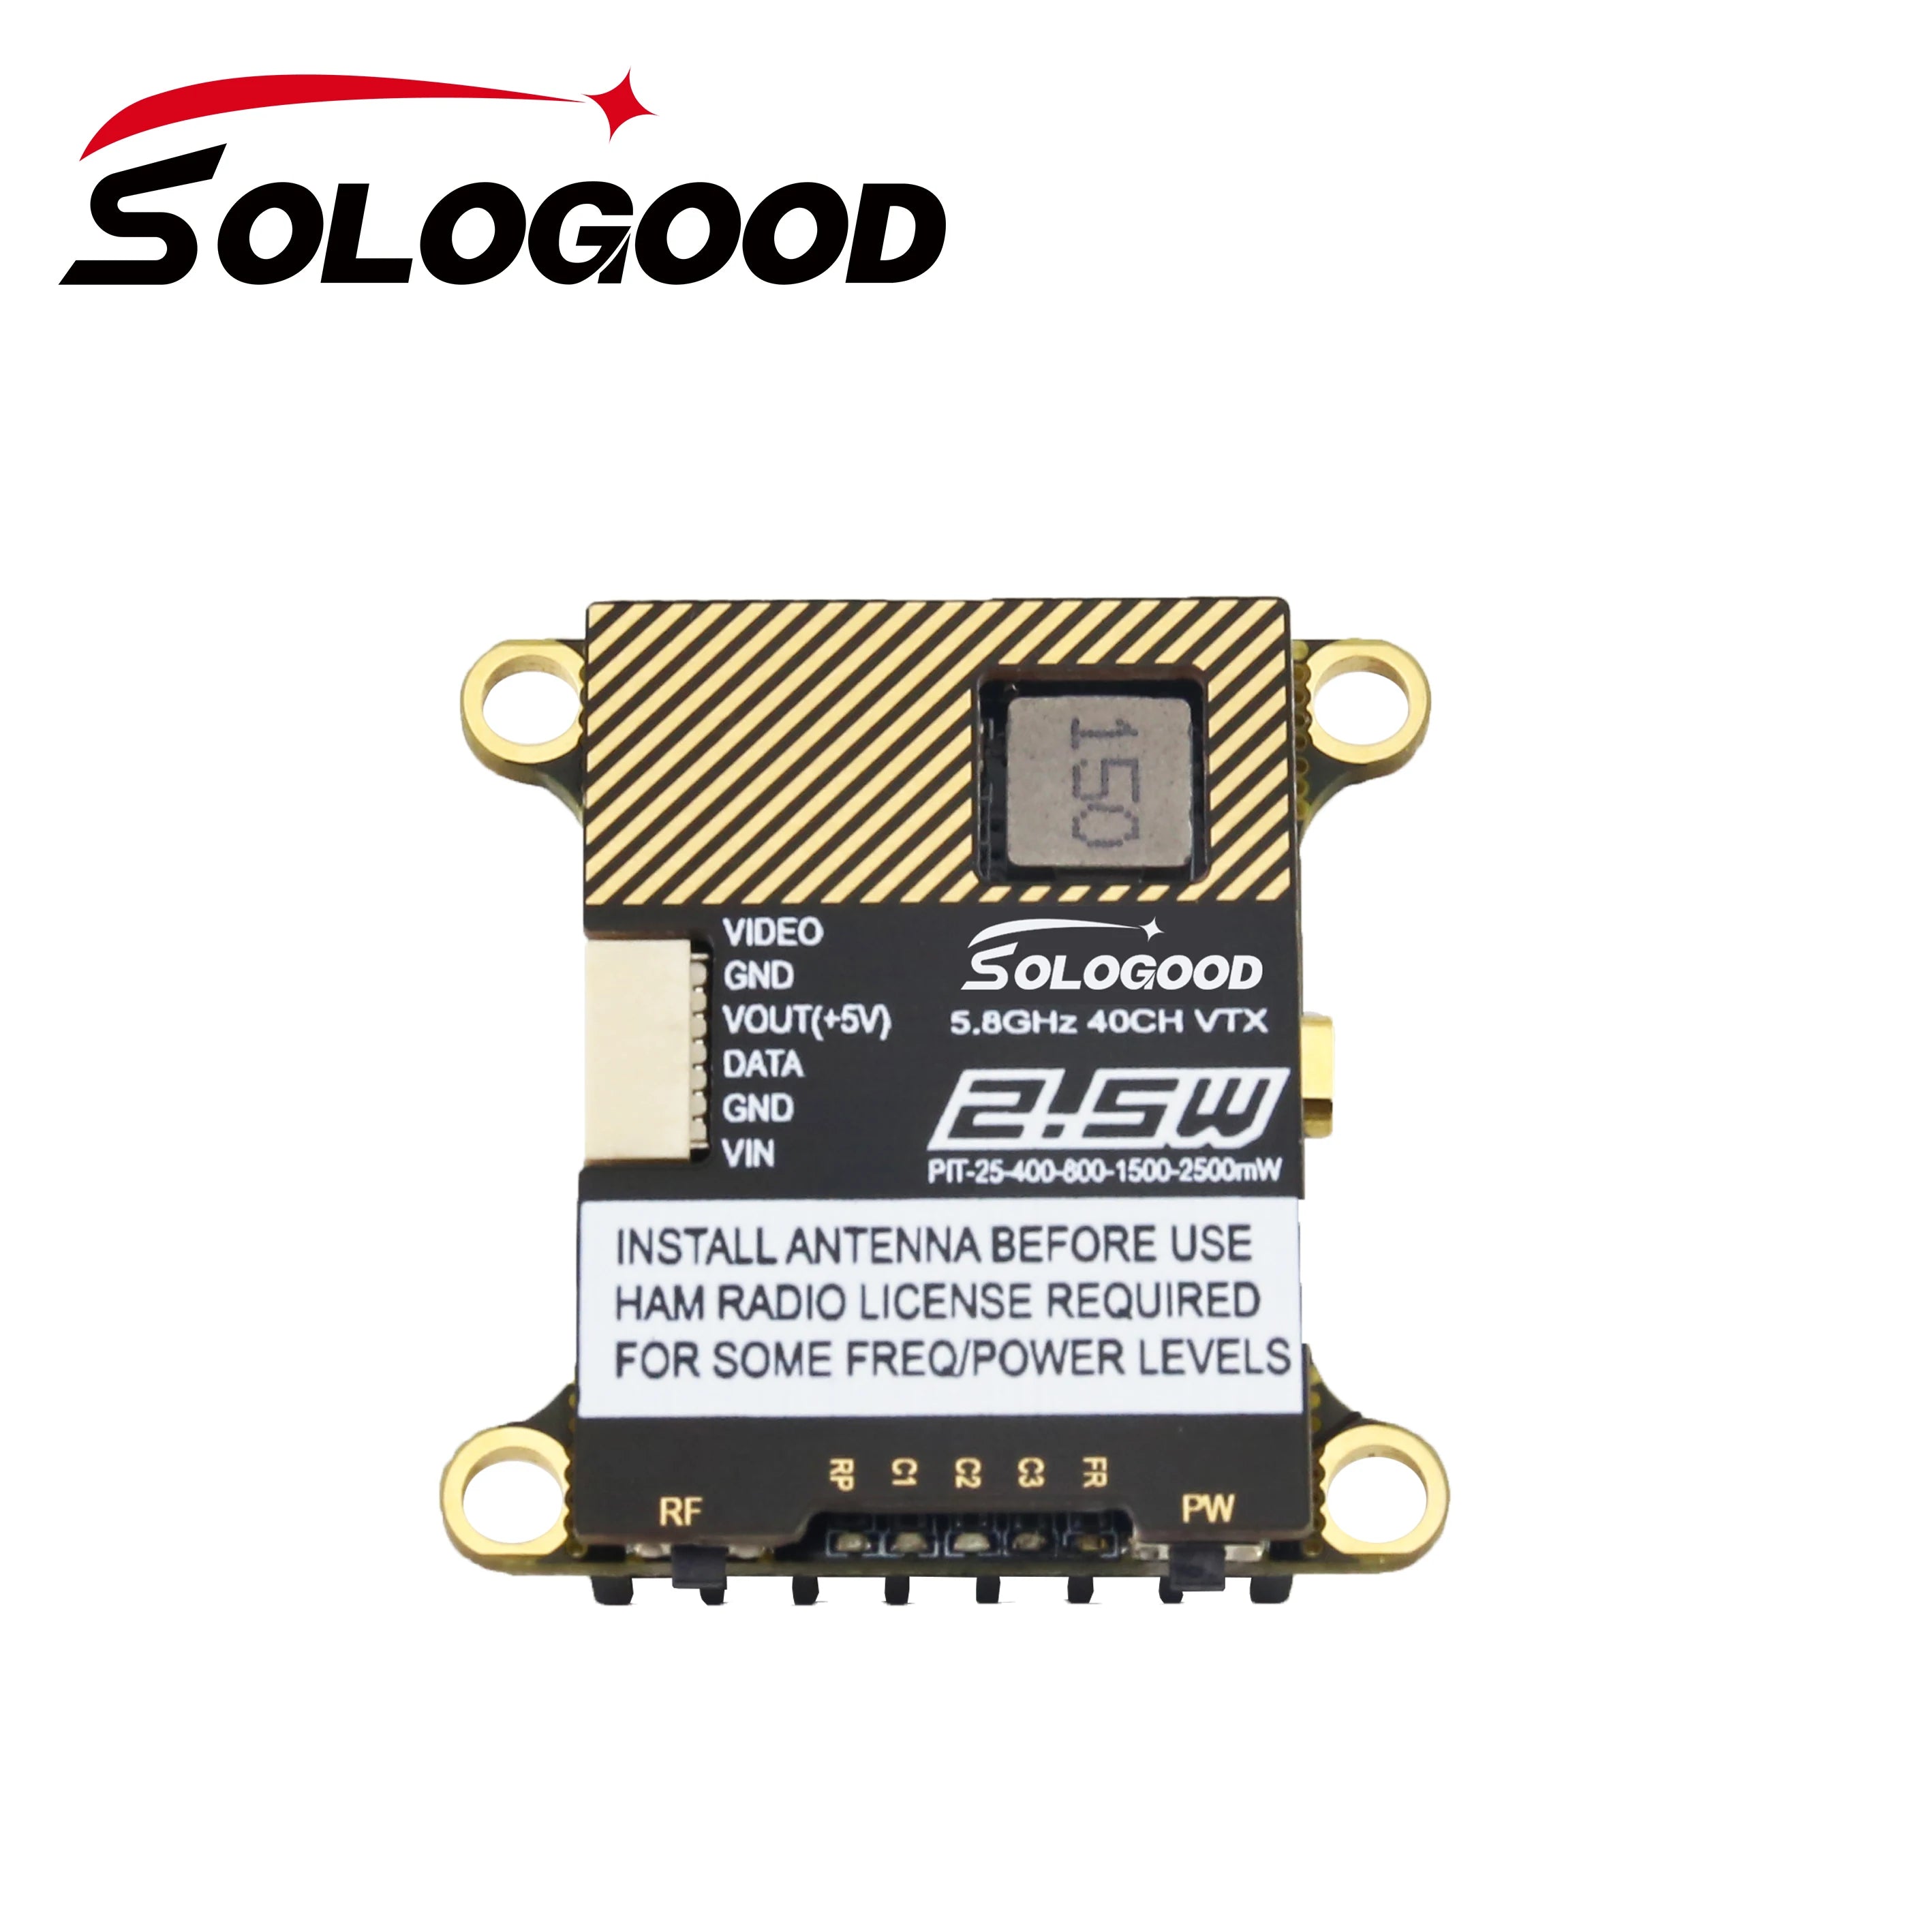 SoloGood 5.8G 2.5W 40CH VTX, HAM RADIO LICENSE REQUIRED FOR SOME FREQPOWER